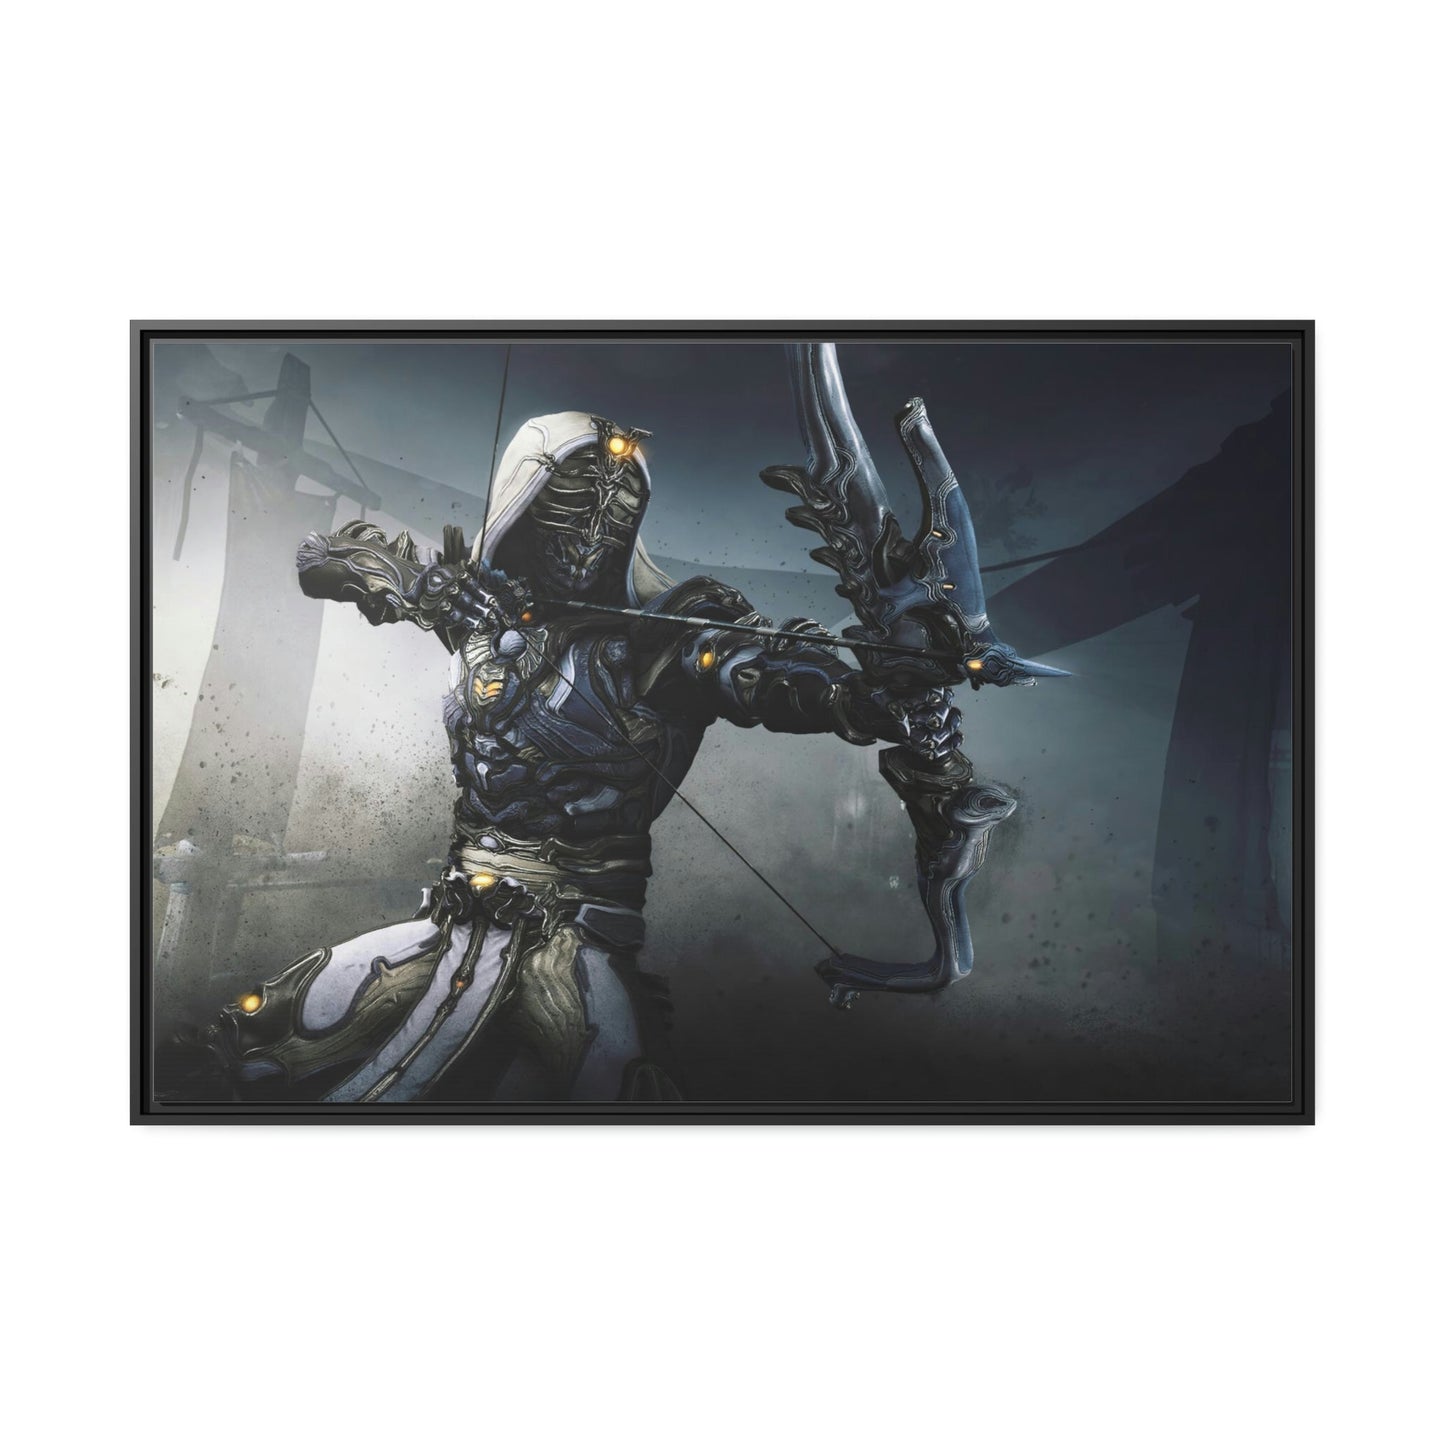 Warframe's Planets: A Collection of Canvas Art Prints for Fans of the Game's Worlds